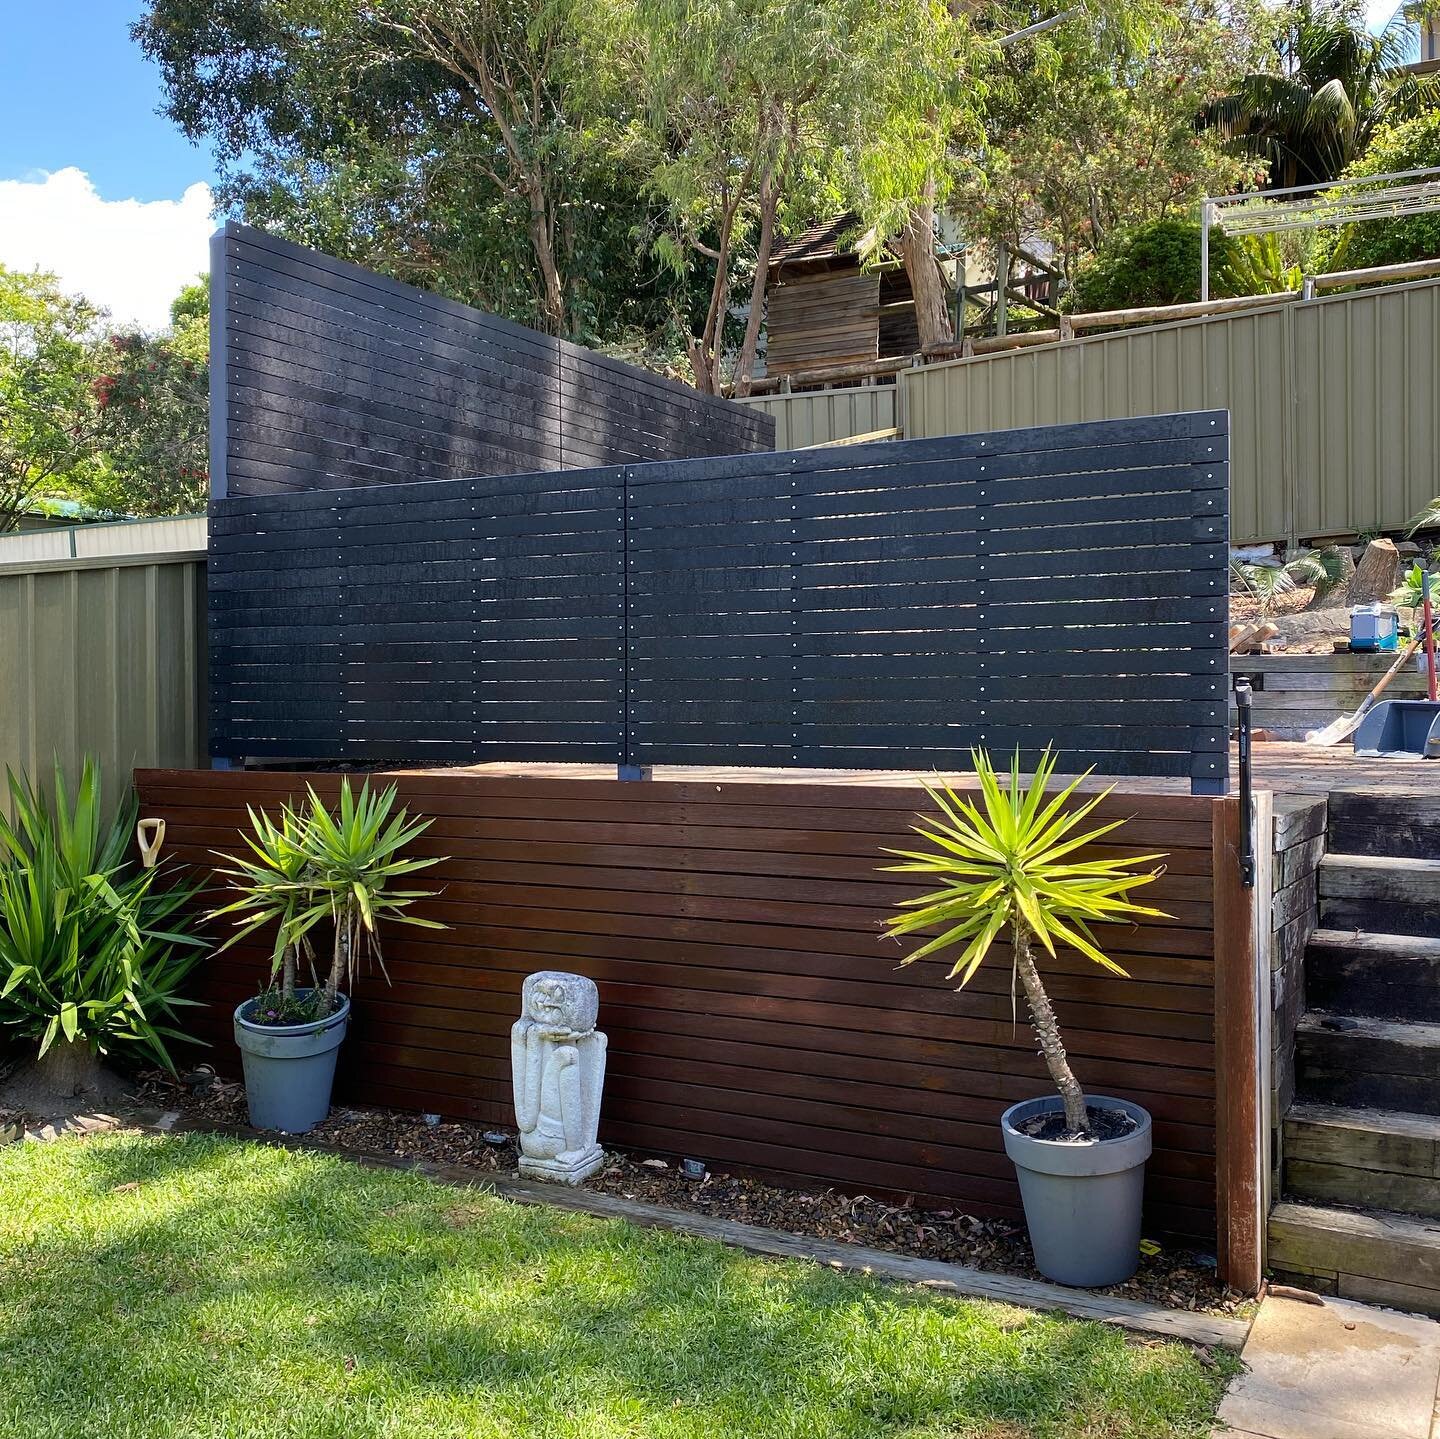 Privacy screen and hand rail
🔅 ✔️✔️✔️ 🔆
.
.
.
.
Would you love this maintenance free privacy screen in your home? 
.
.
.
.
COVID restrictions are slowly being lifted and summer is around the corner.
Will you be entertaining with the appropriate pri